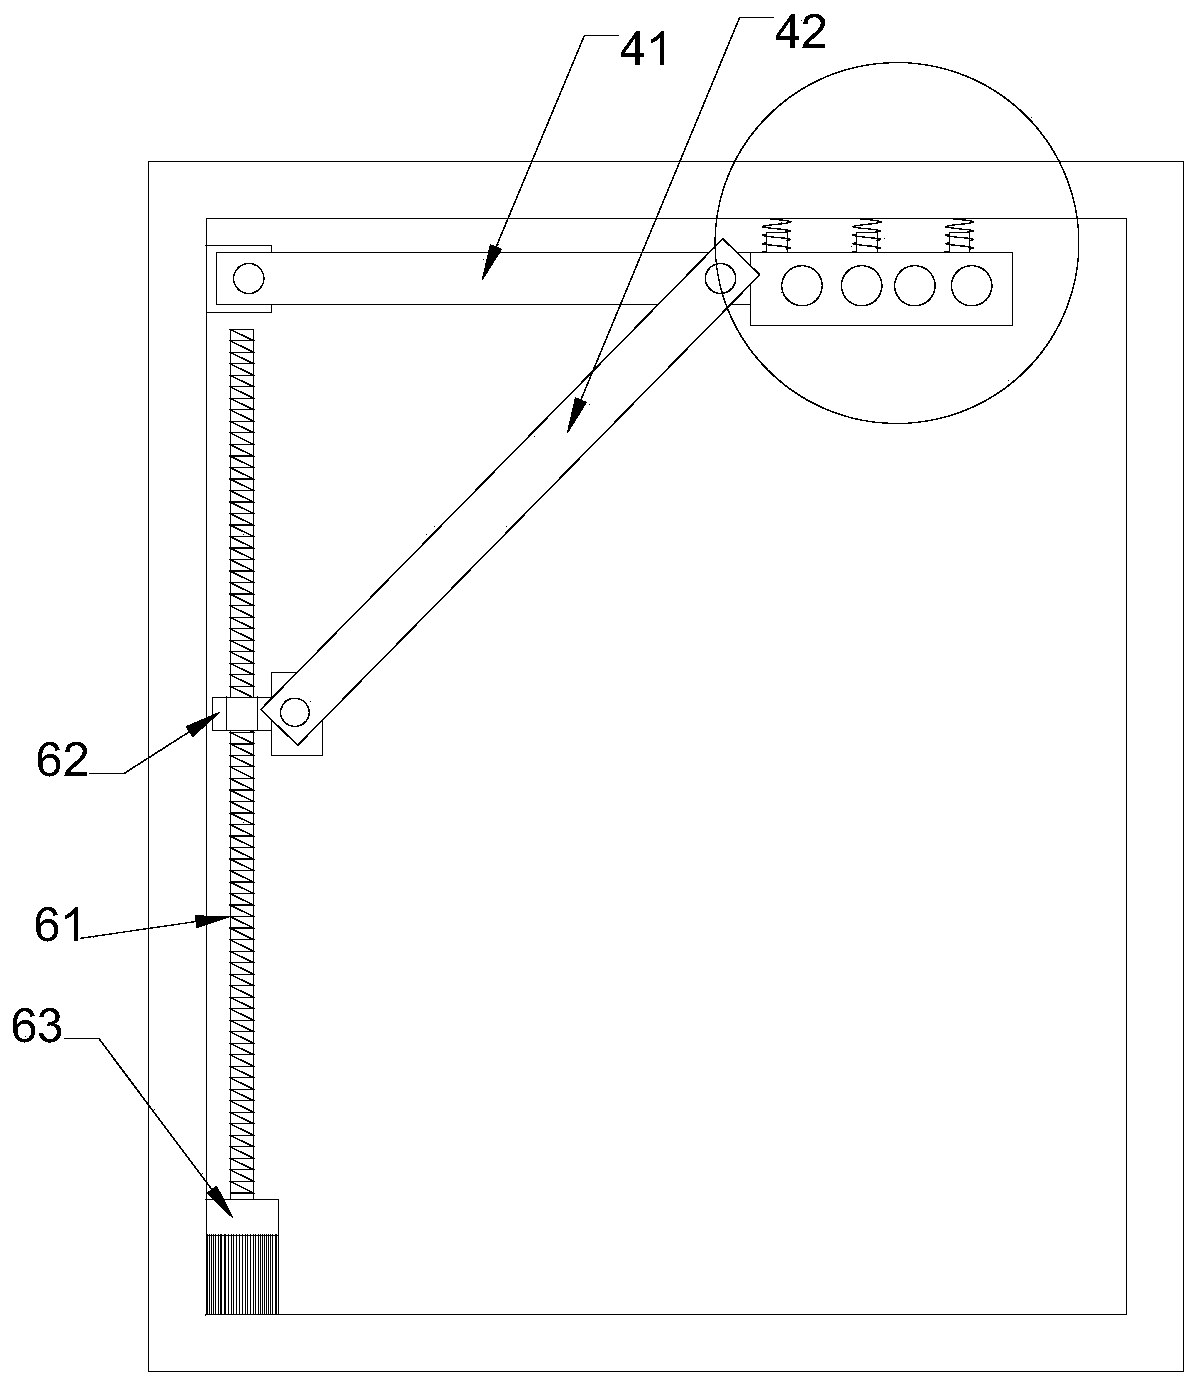 High-voltage electric cabinet with arc detection device